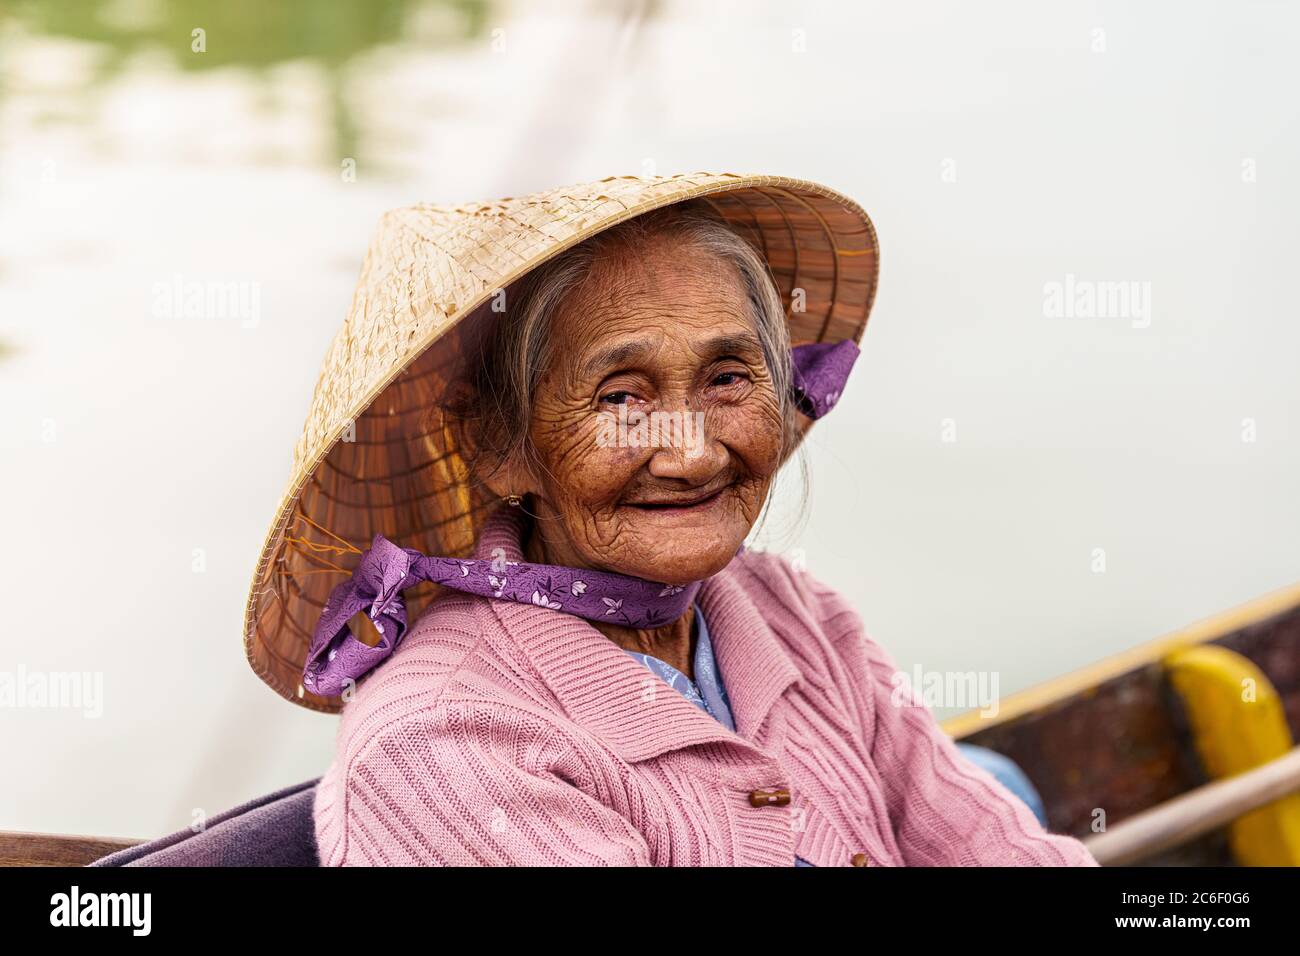 Vietnamese old woman in violet sweater and hat is sitting on a boat while smiling Stock Photo